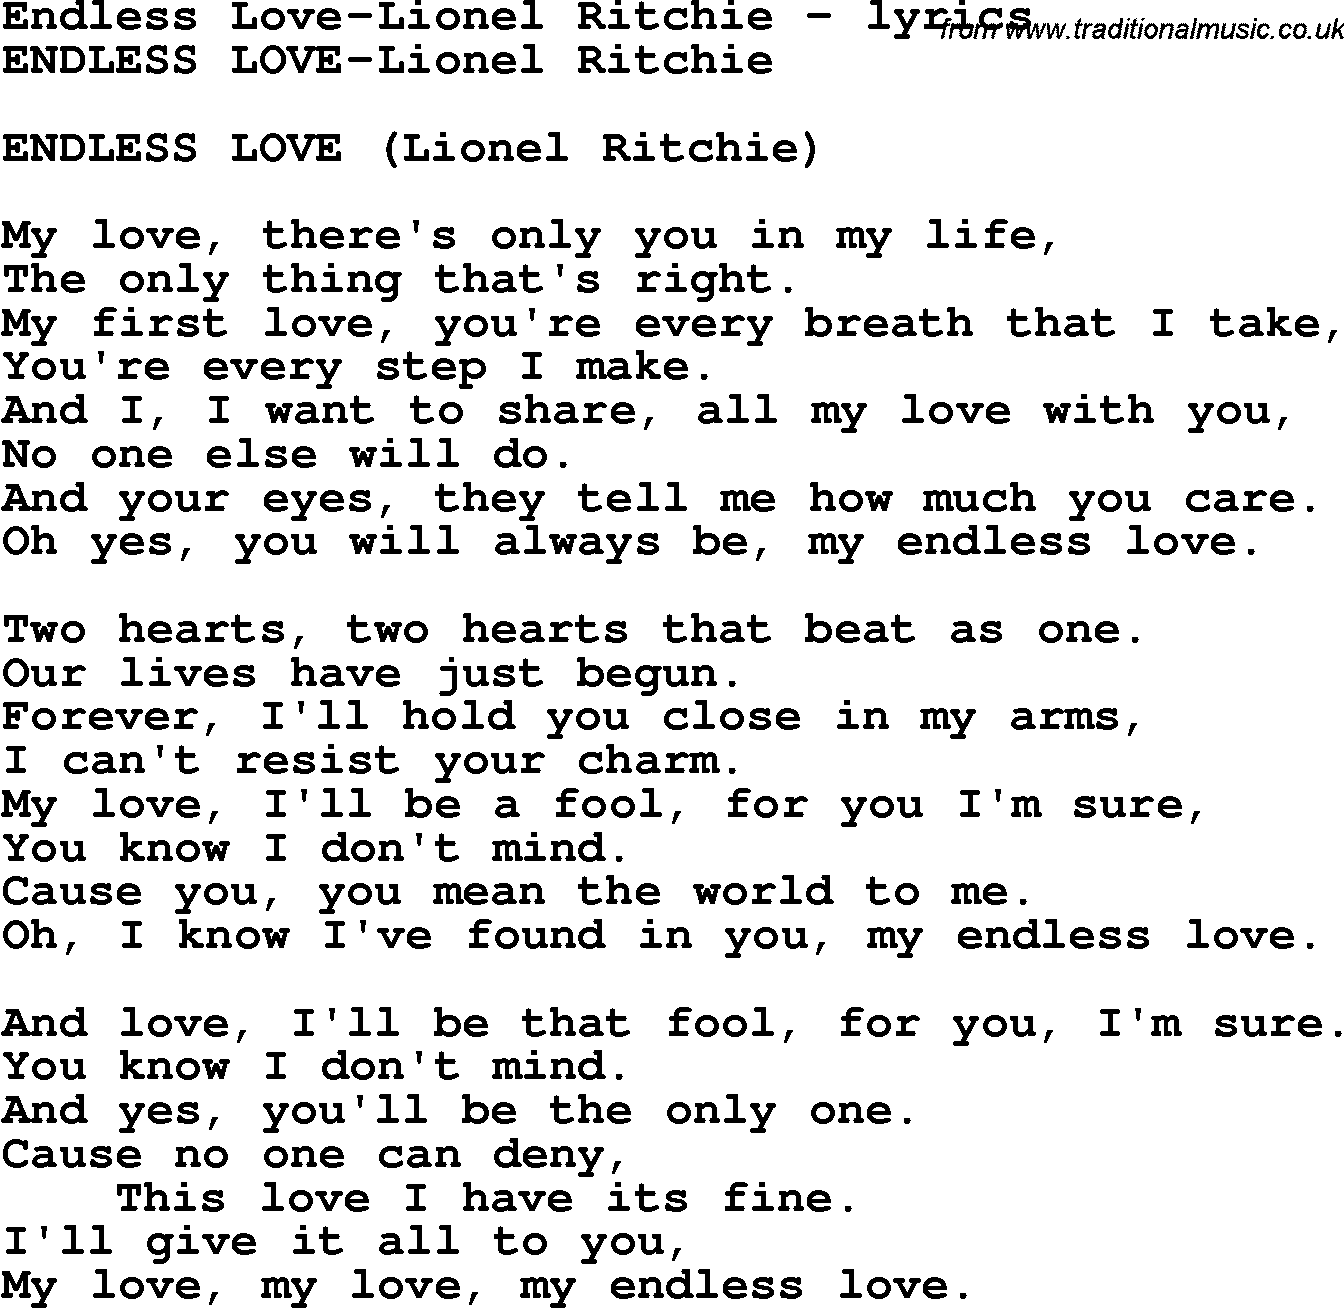 Love Song Lyrics For Endless Love Lionel Ritchie